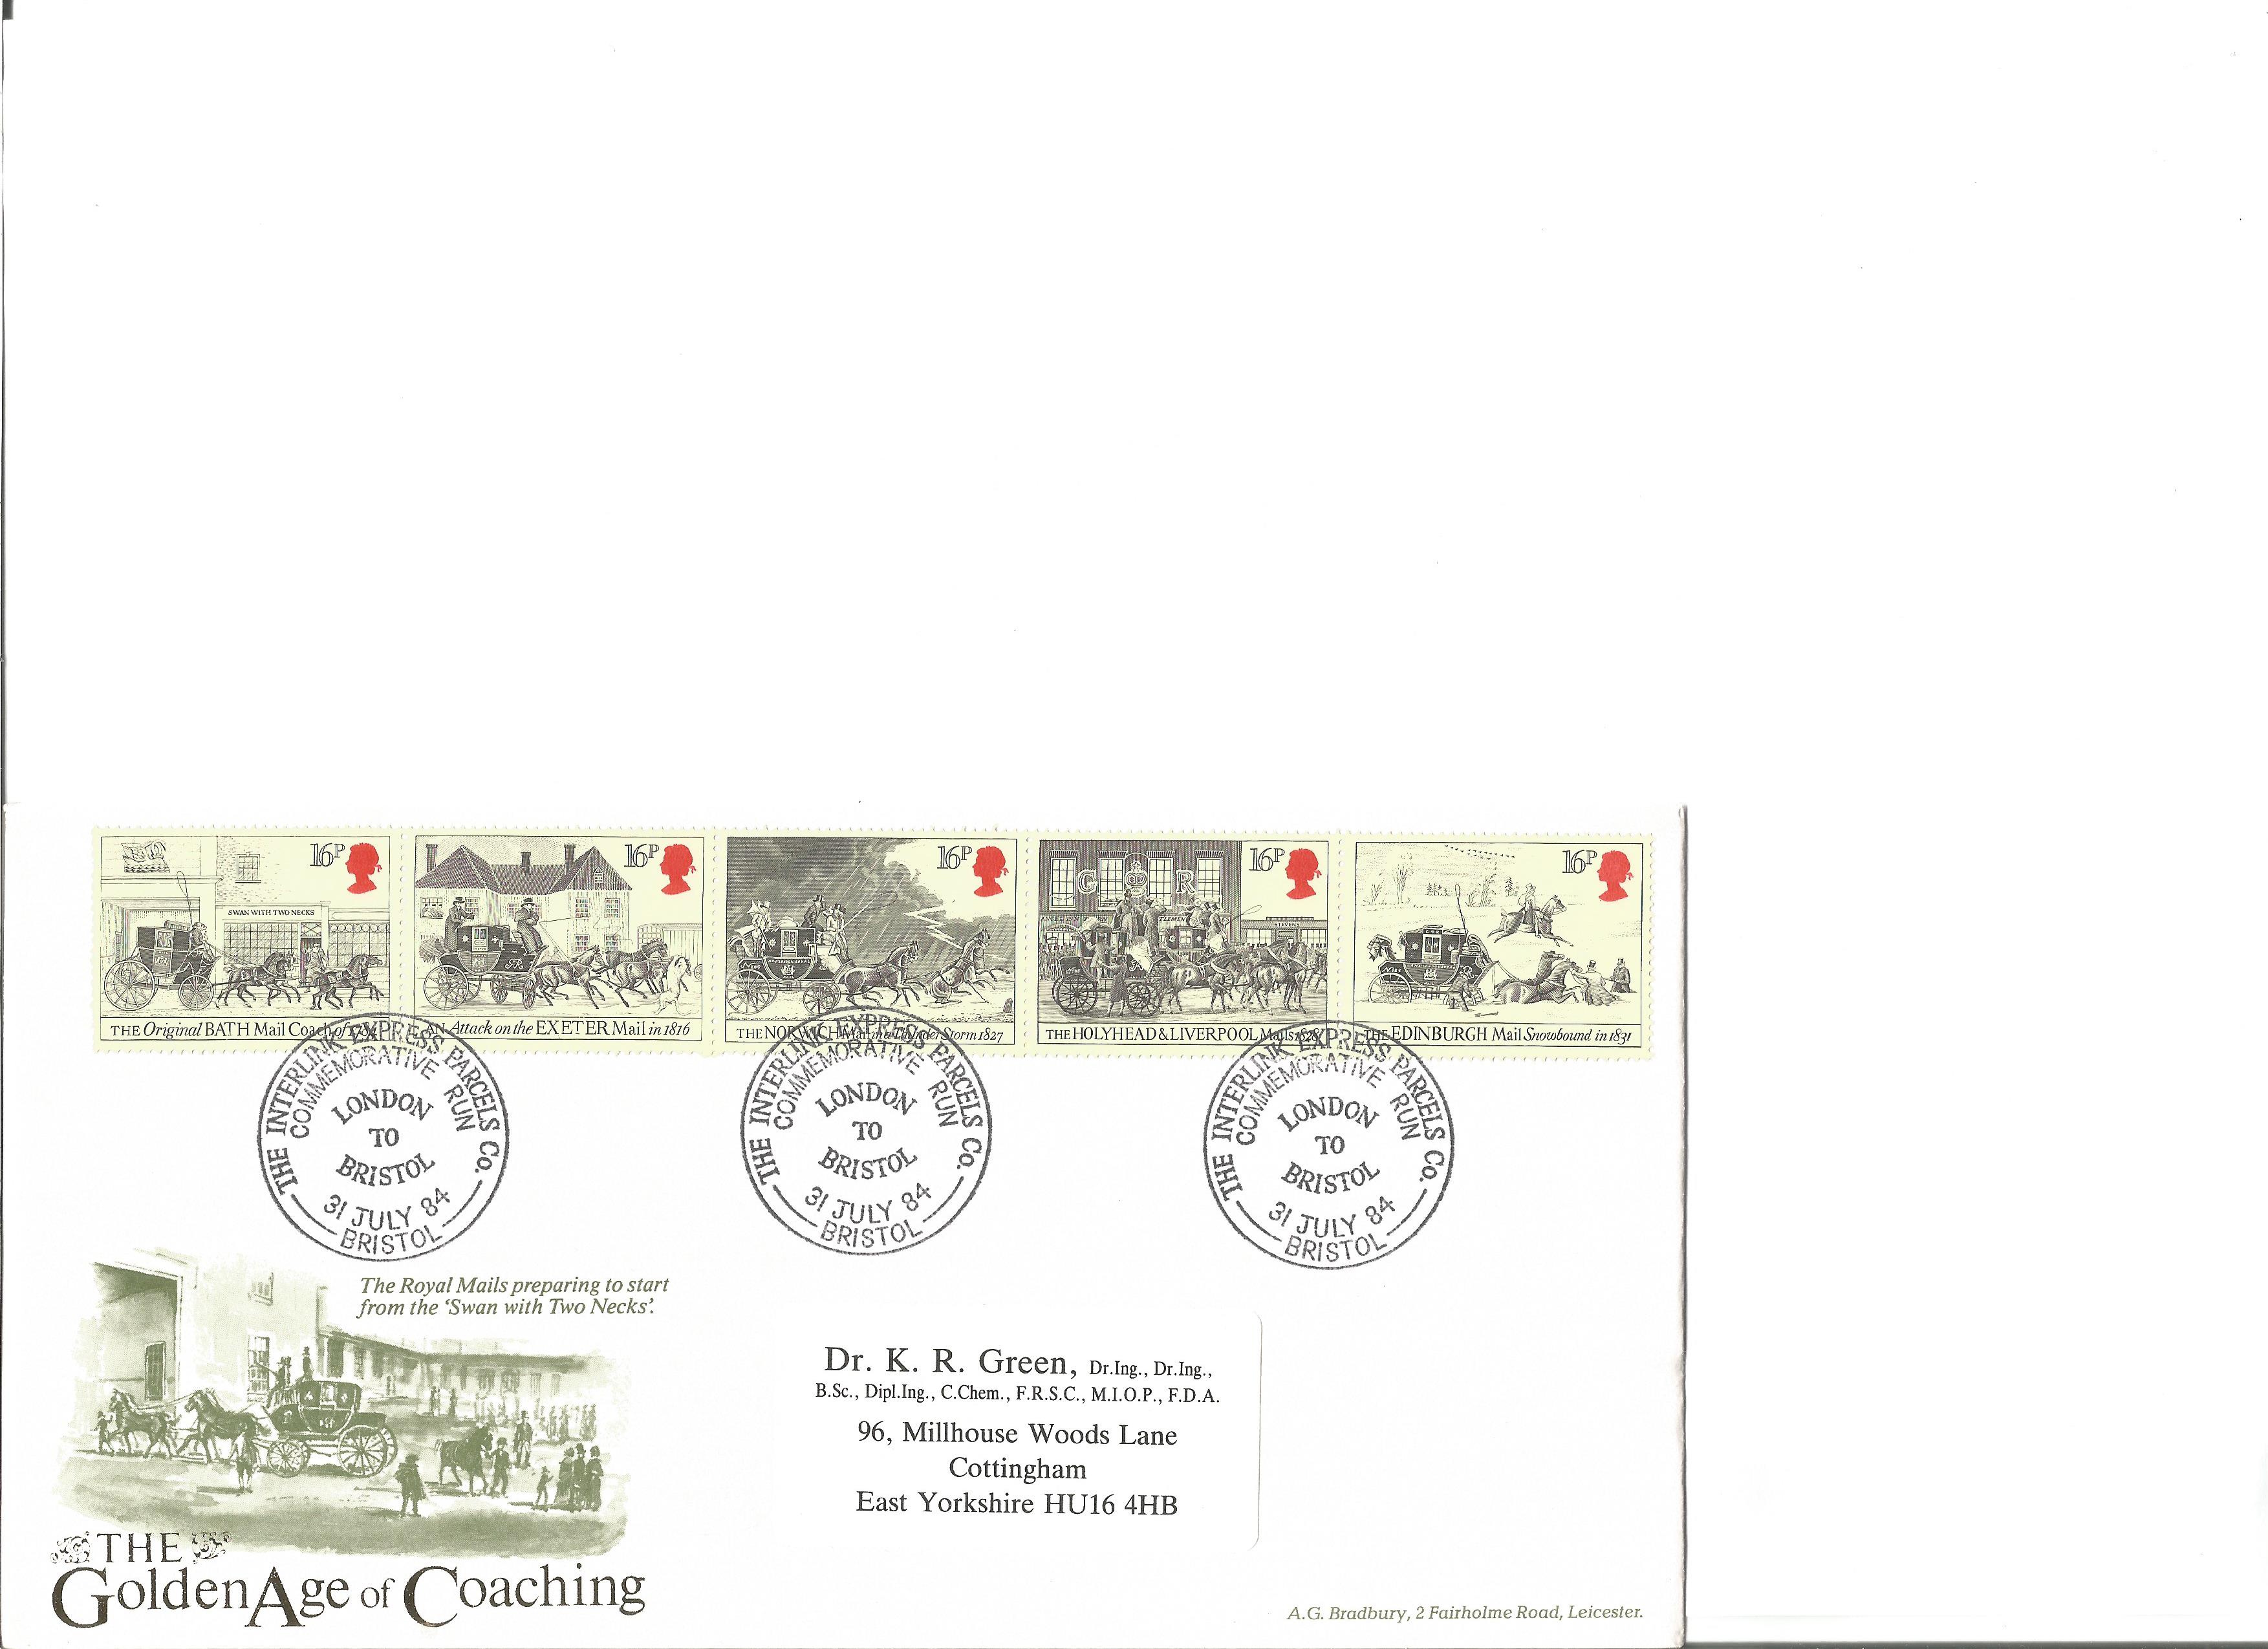 The Golden Age of Coaching FDC. 31/7/84 Bristol postmark. Full set of stamps. Good Condition. We